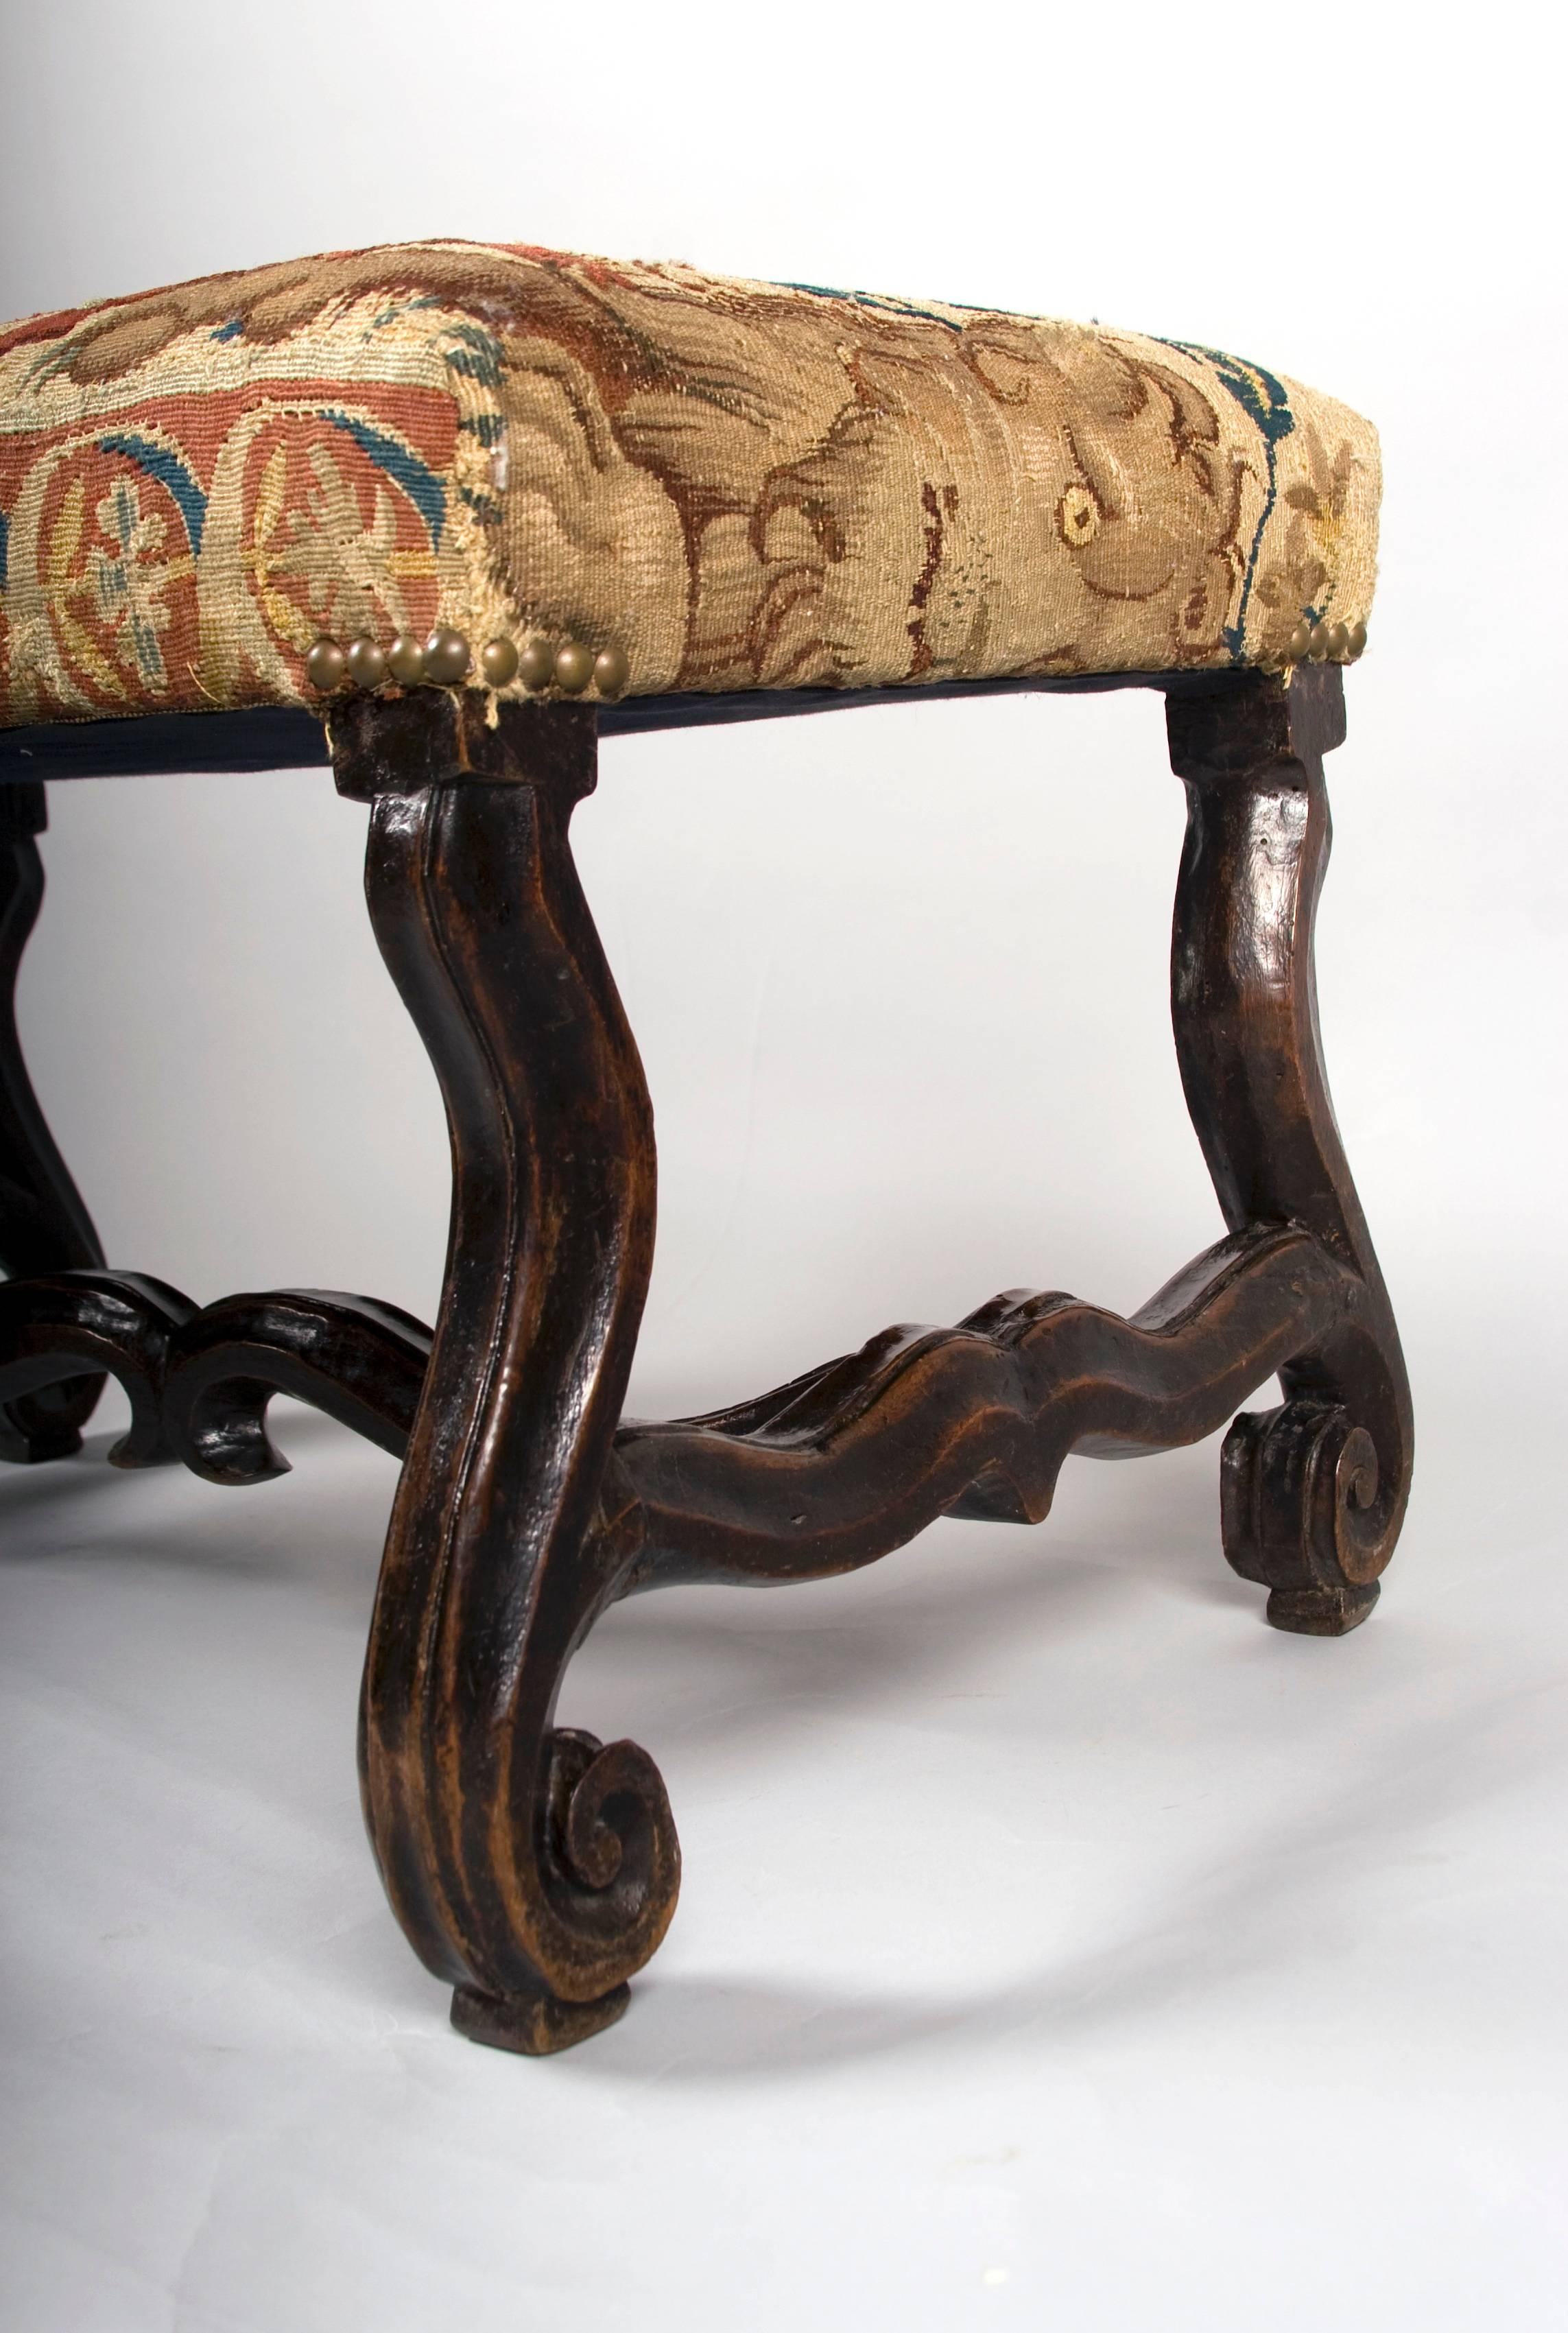 18th century stools, in walnut, upholstered with 16th century Tapestry
fragments, one stool with a wonderful child petting his dog and the
second one sporting a eagle. Both tapestries are in wonderful detail
repaired condition. The stools are